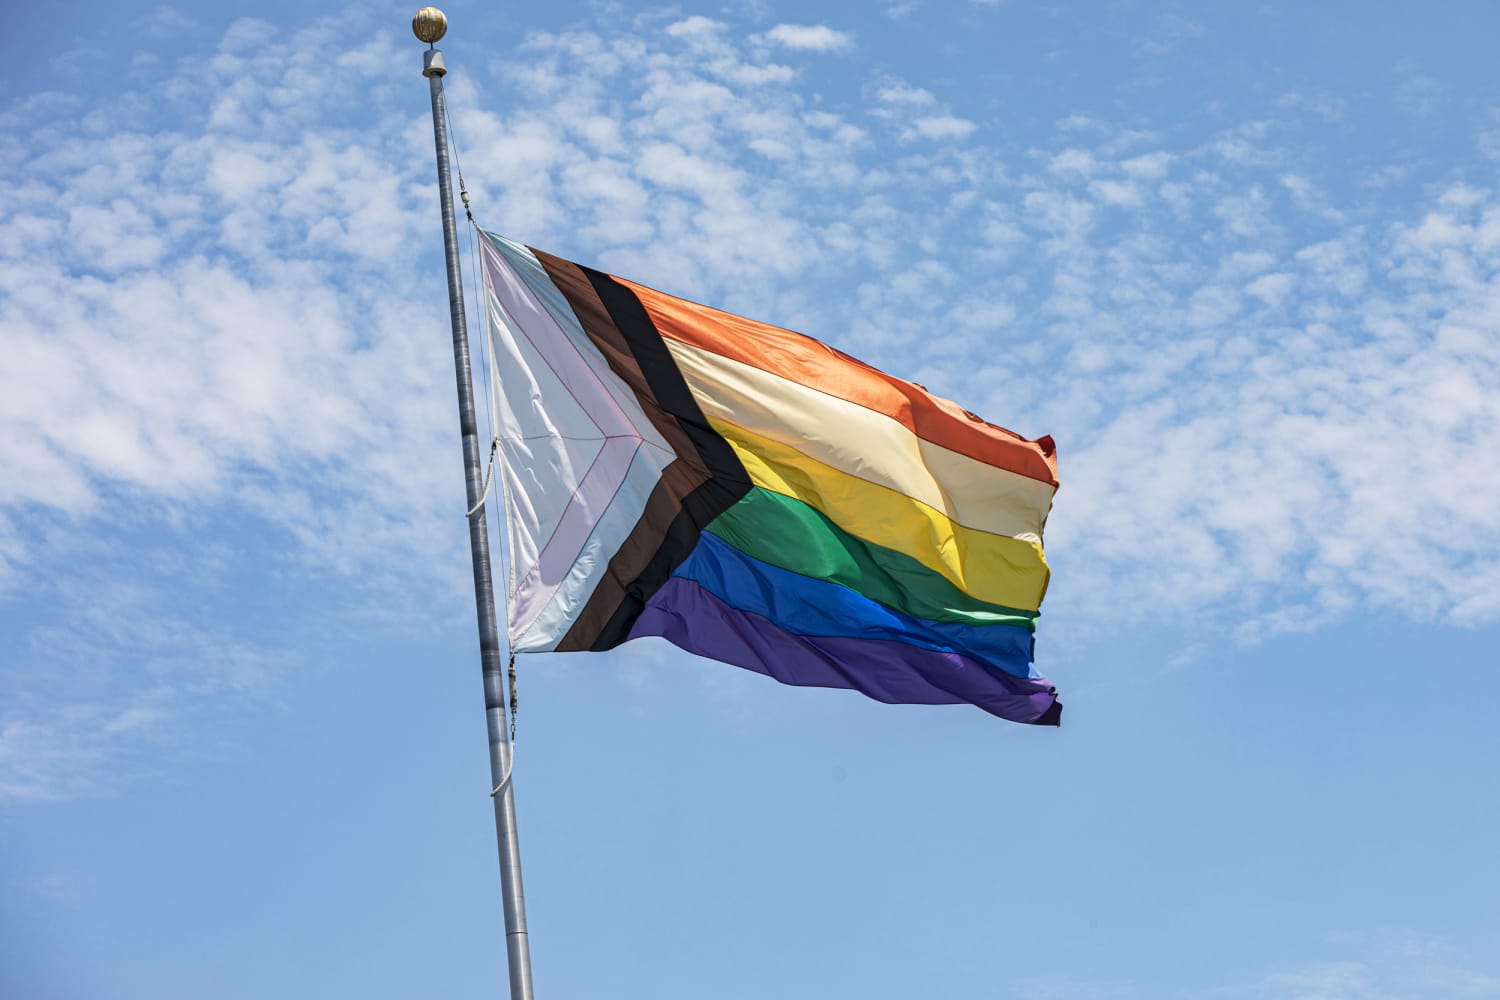 Michigan teachers told to take down Pride flags after ‘external challenge’